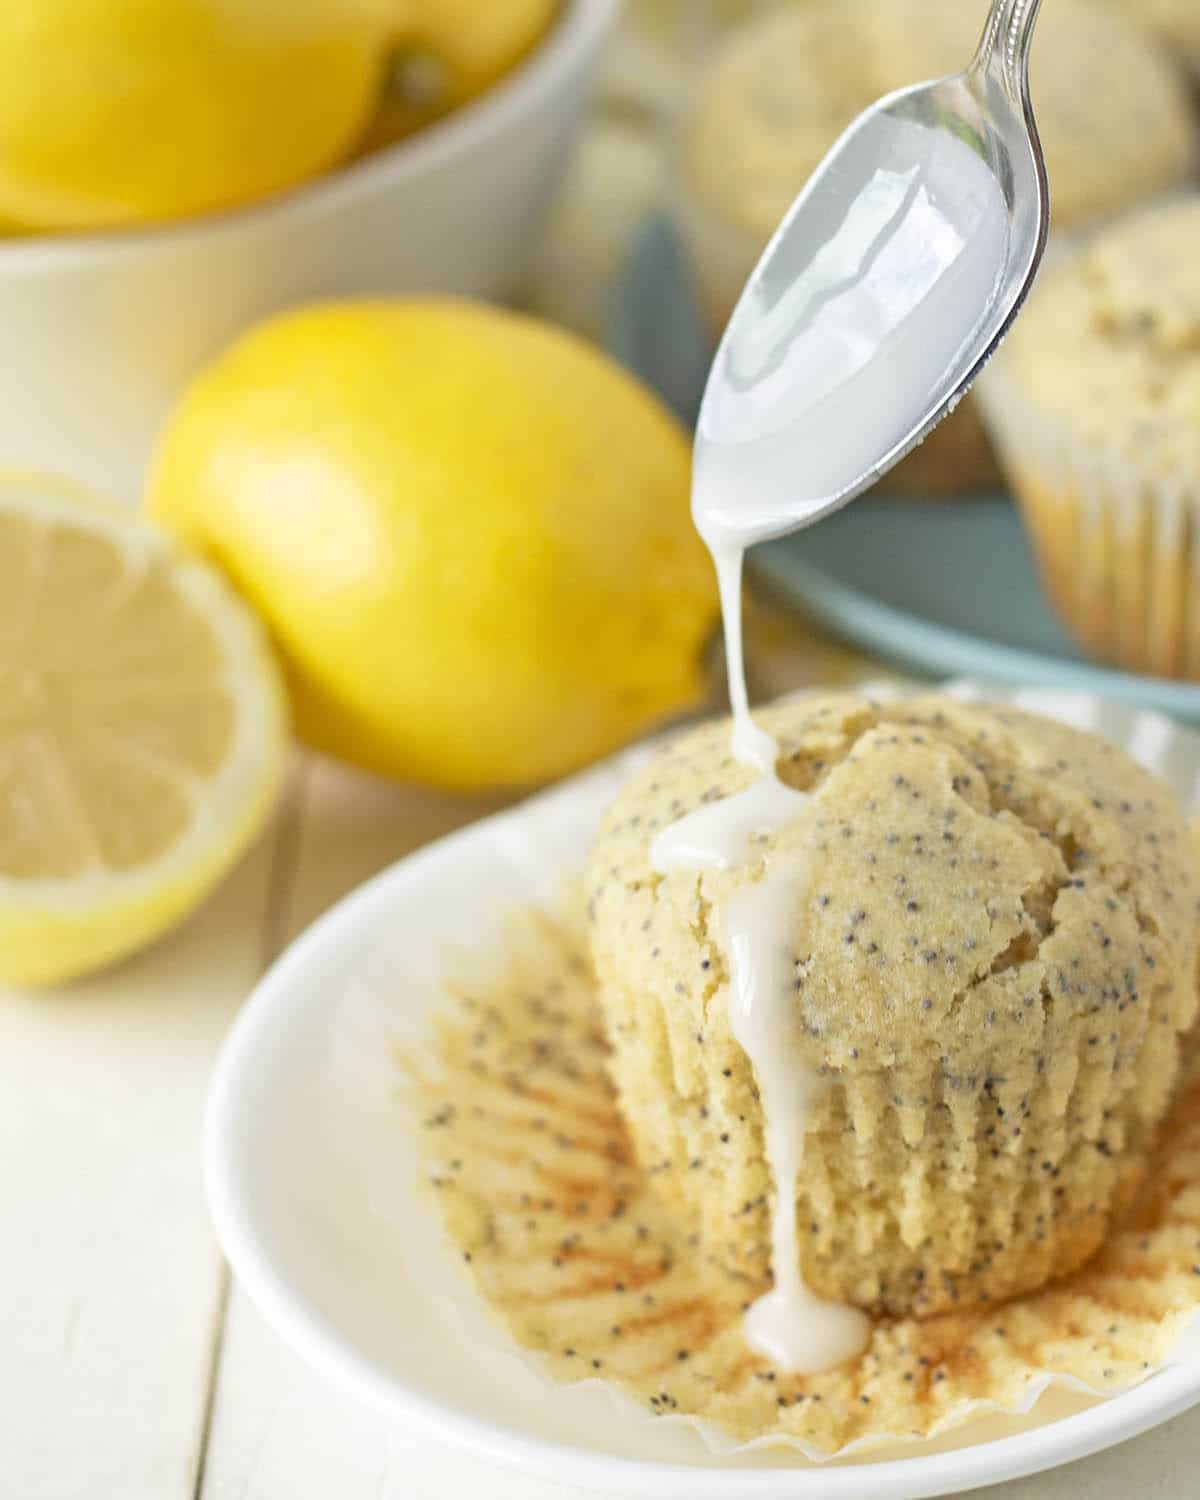 Lemon glaze being drizzled with a spoon onto a muffin.